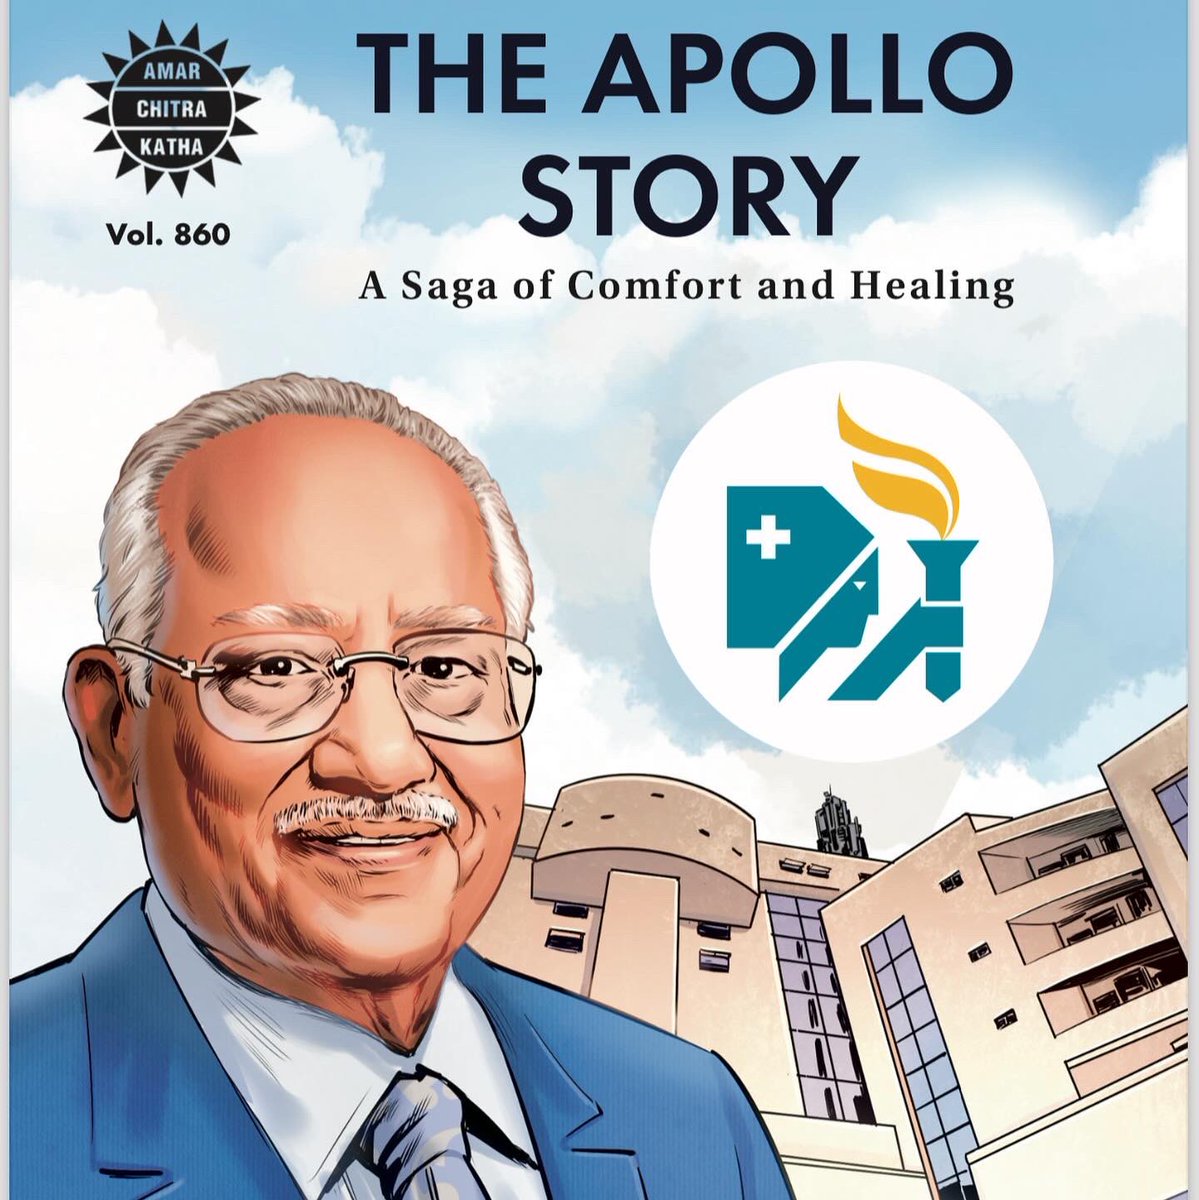 Happy 91st Birthday Thatha @DrPrathapCReddy The Apollo Story is an emotional tribute to every girl child to dream without boundaries & to every father to support their daughters as equals Thank You @amarchitrkatha @RanaDaggubati for helping us put this together @ApolloFND